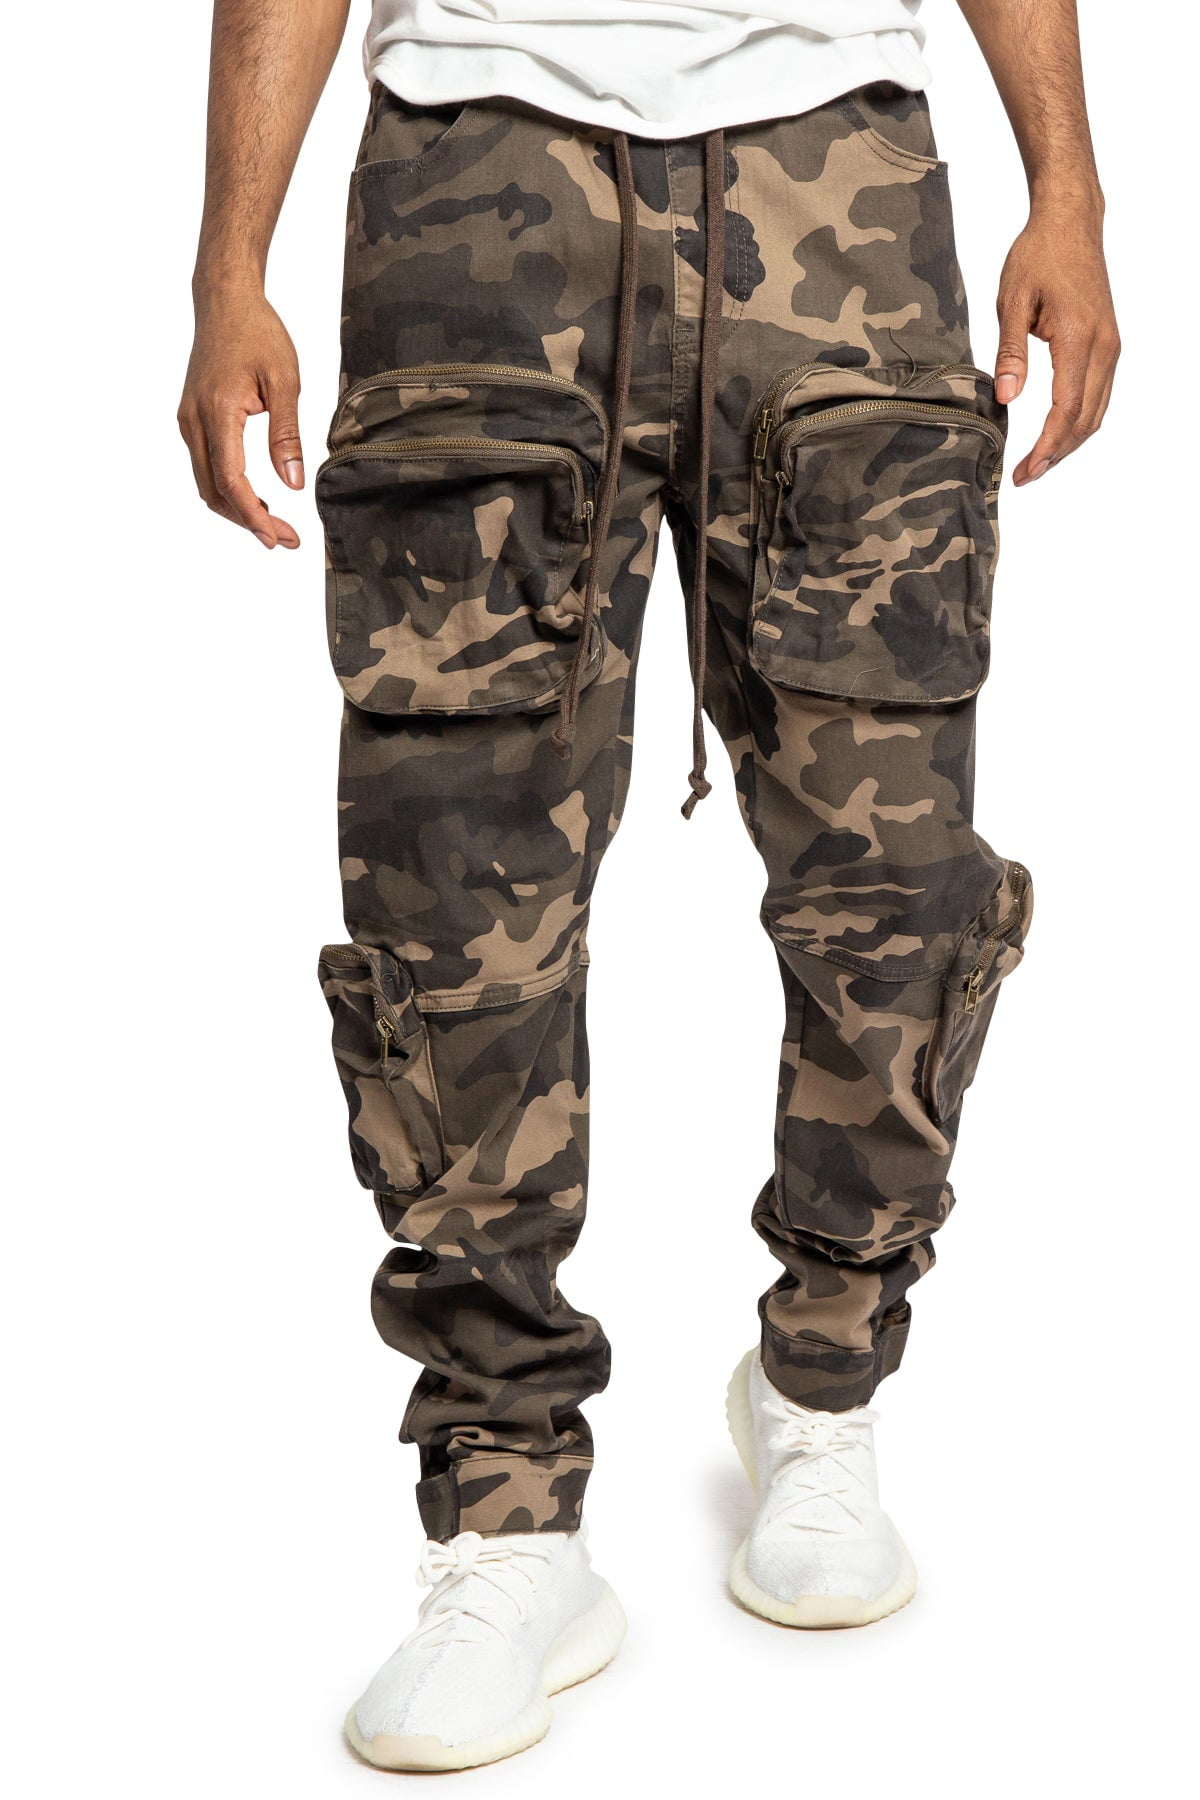 Victorious Men's Double Front Cargo Jogger Pants, up to 5X 